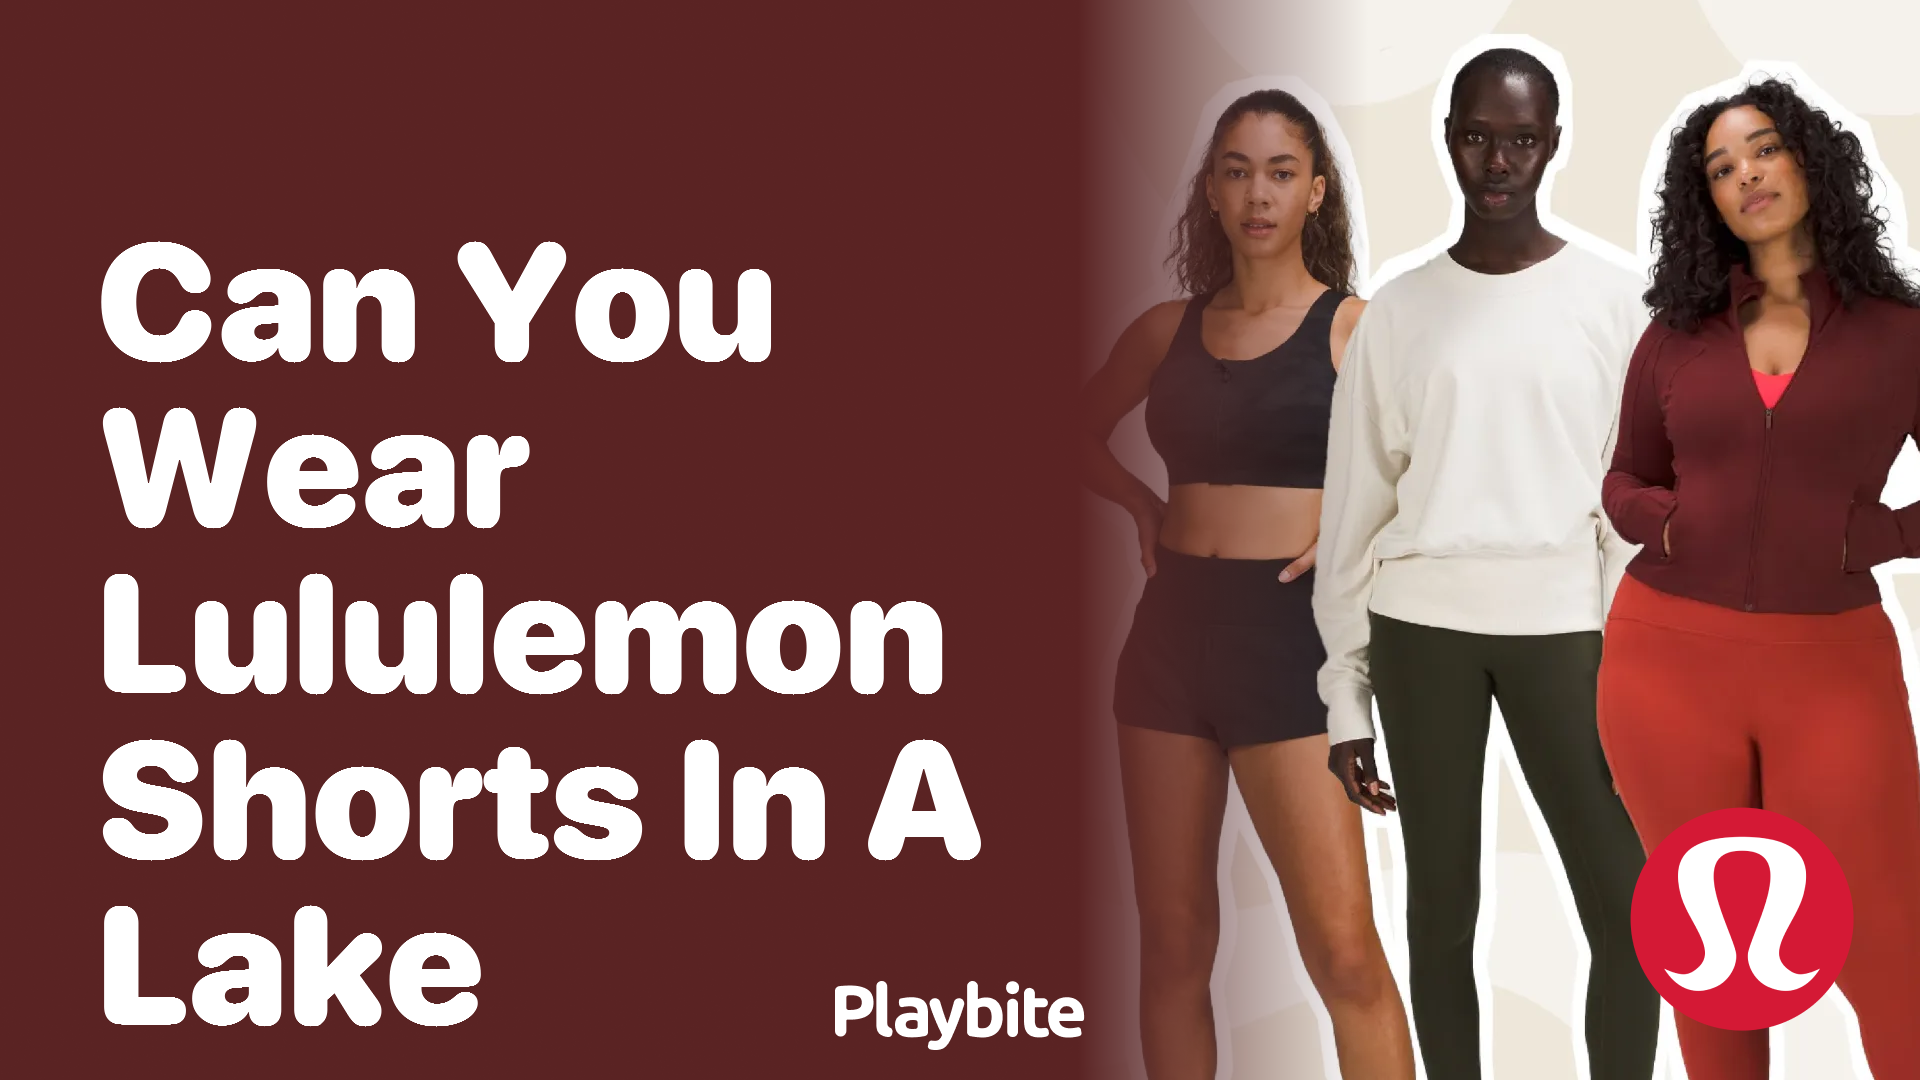 Can You Wear Lululemon Shorts in a Lake? - Playbite